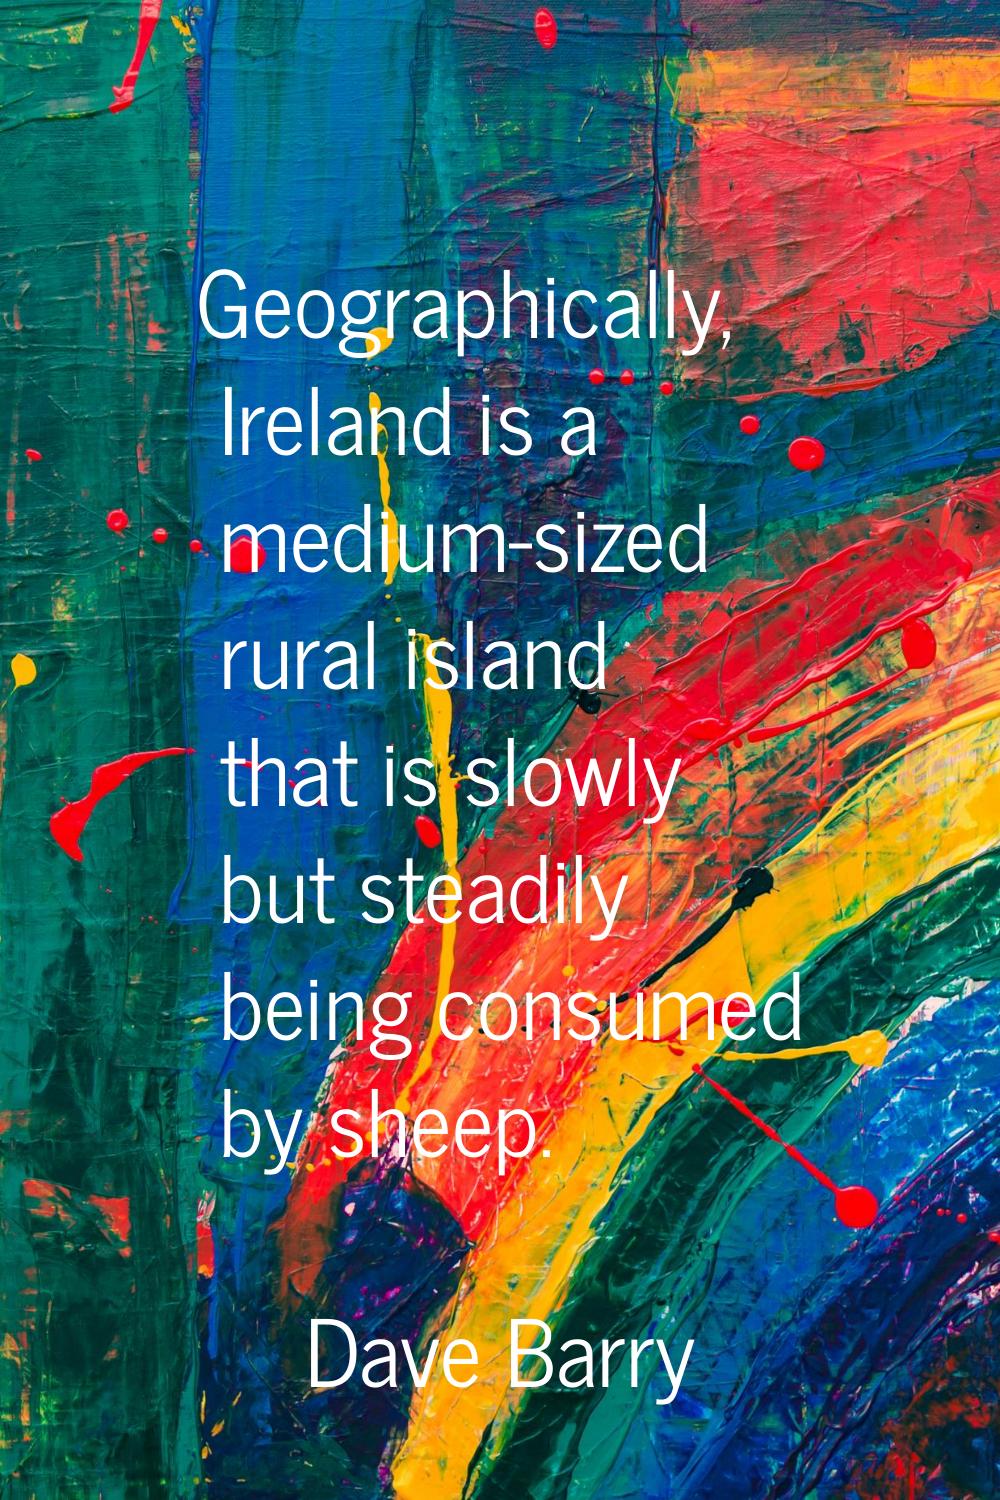 Geographically, Ireland is a medium-sized rural island that is slowly but steadily being consumed b